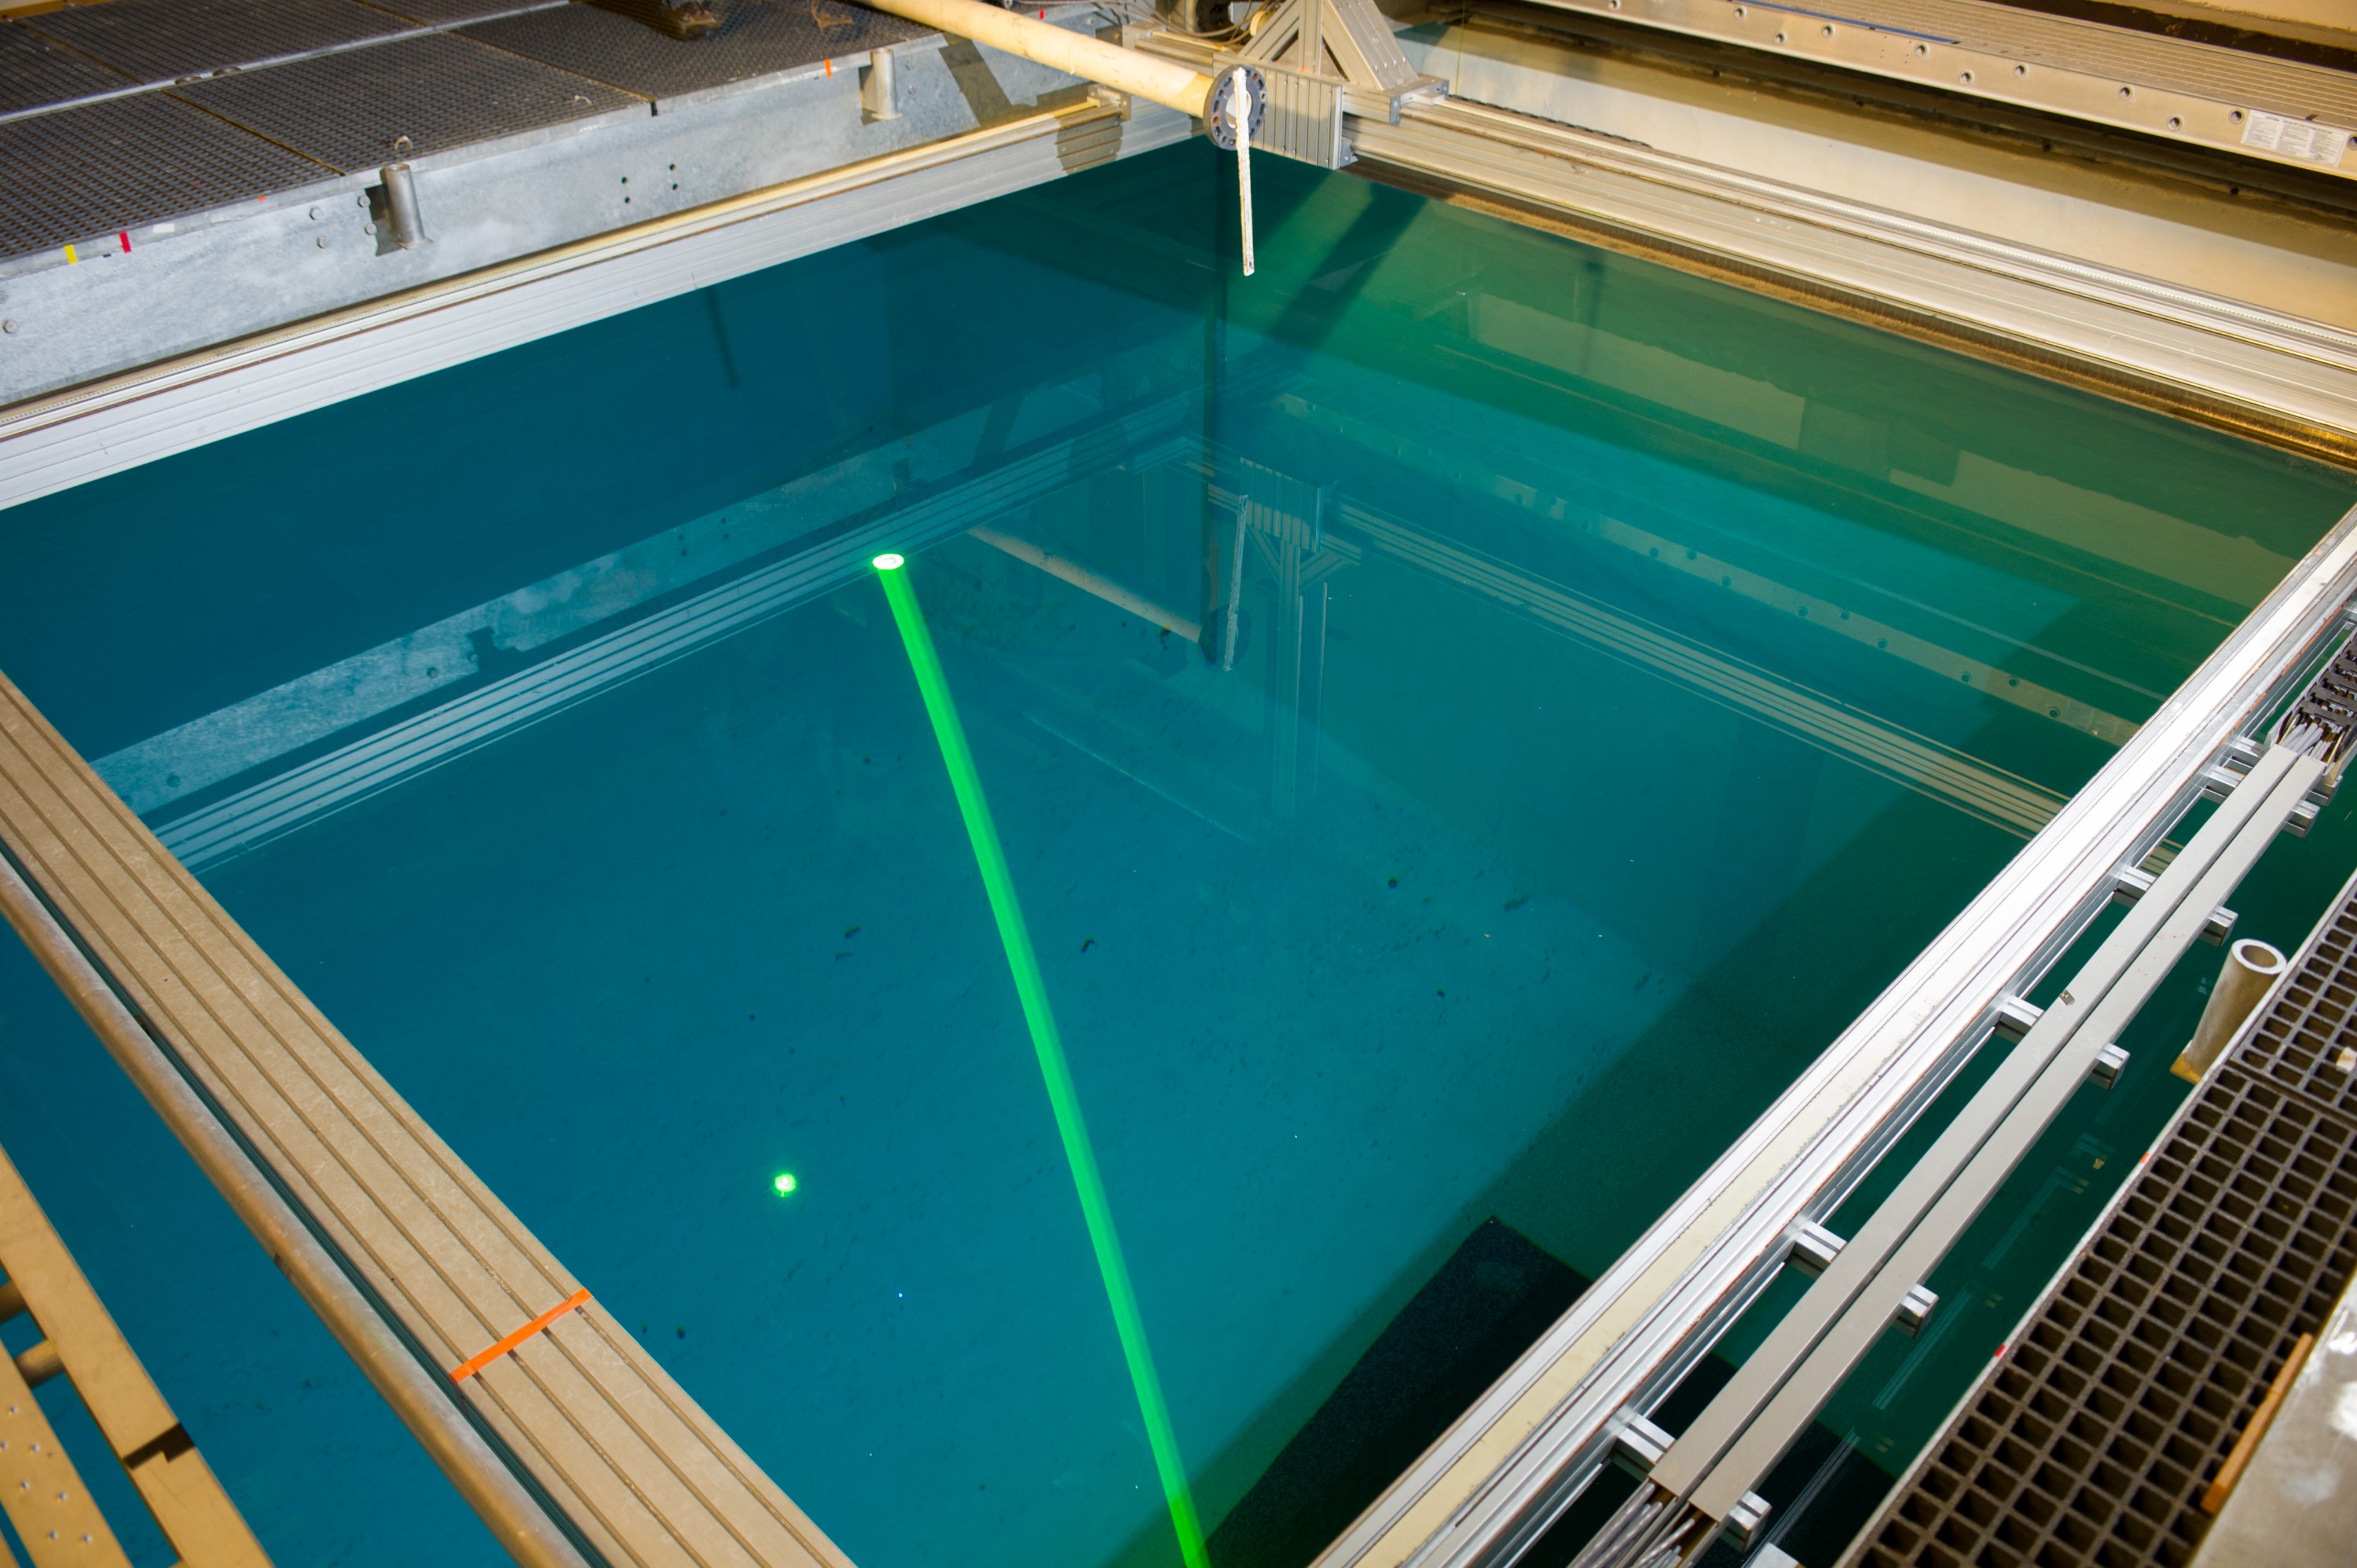 The GTRI lightweight lidar prototype system uses a special green laser that penetrates water to considerable depths. (Credit: Rob Felt)